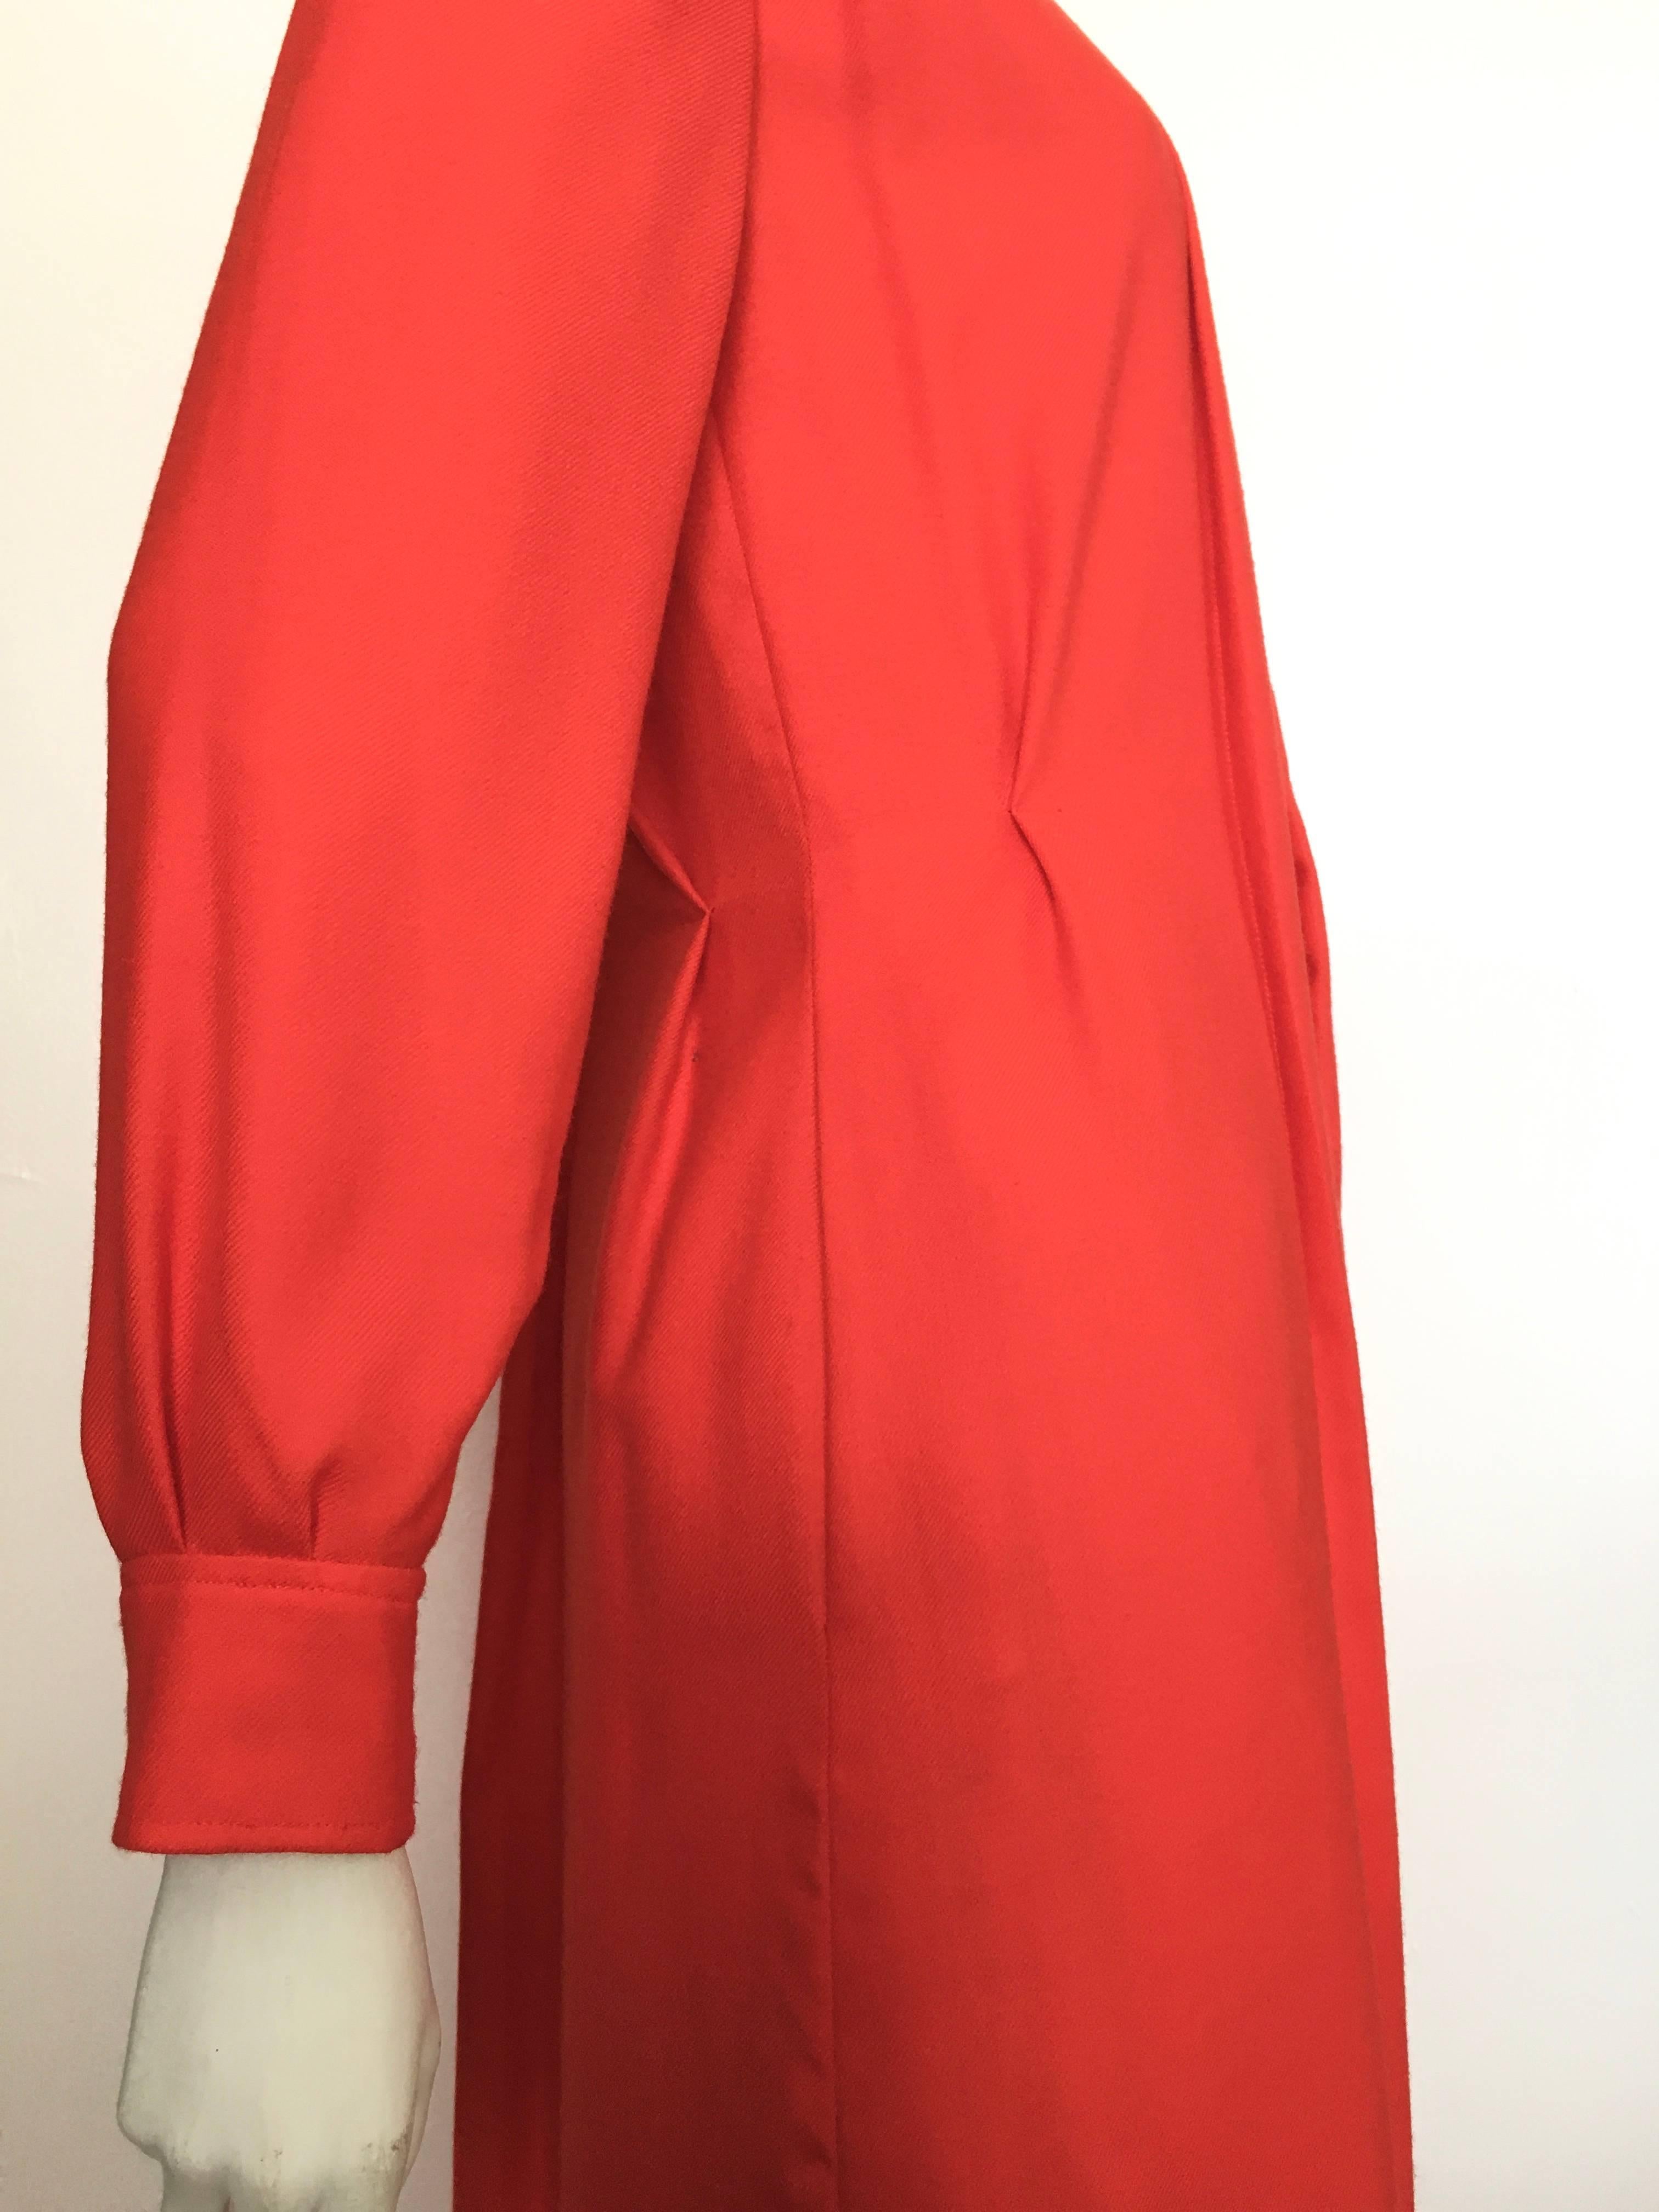 Women's or Men's Courreges Red Wool Long Sleeve Dress with Pockets, 1980s  For Sale